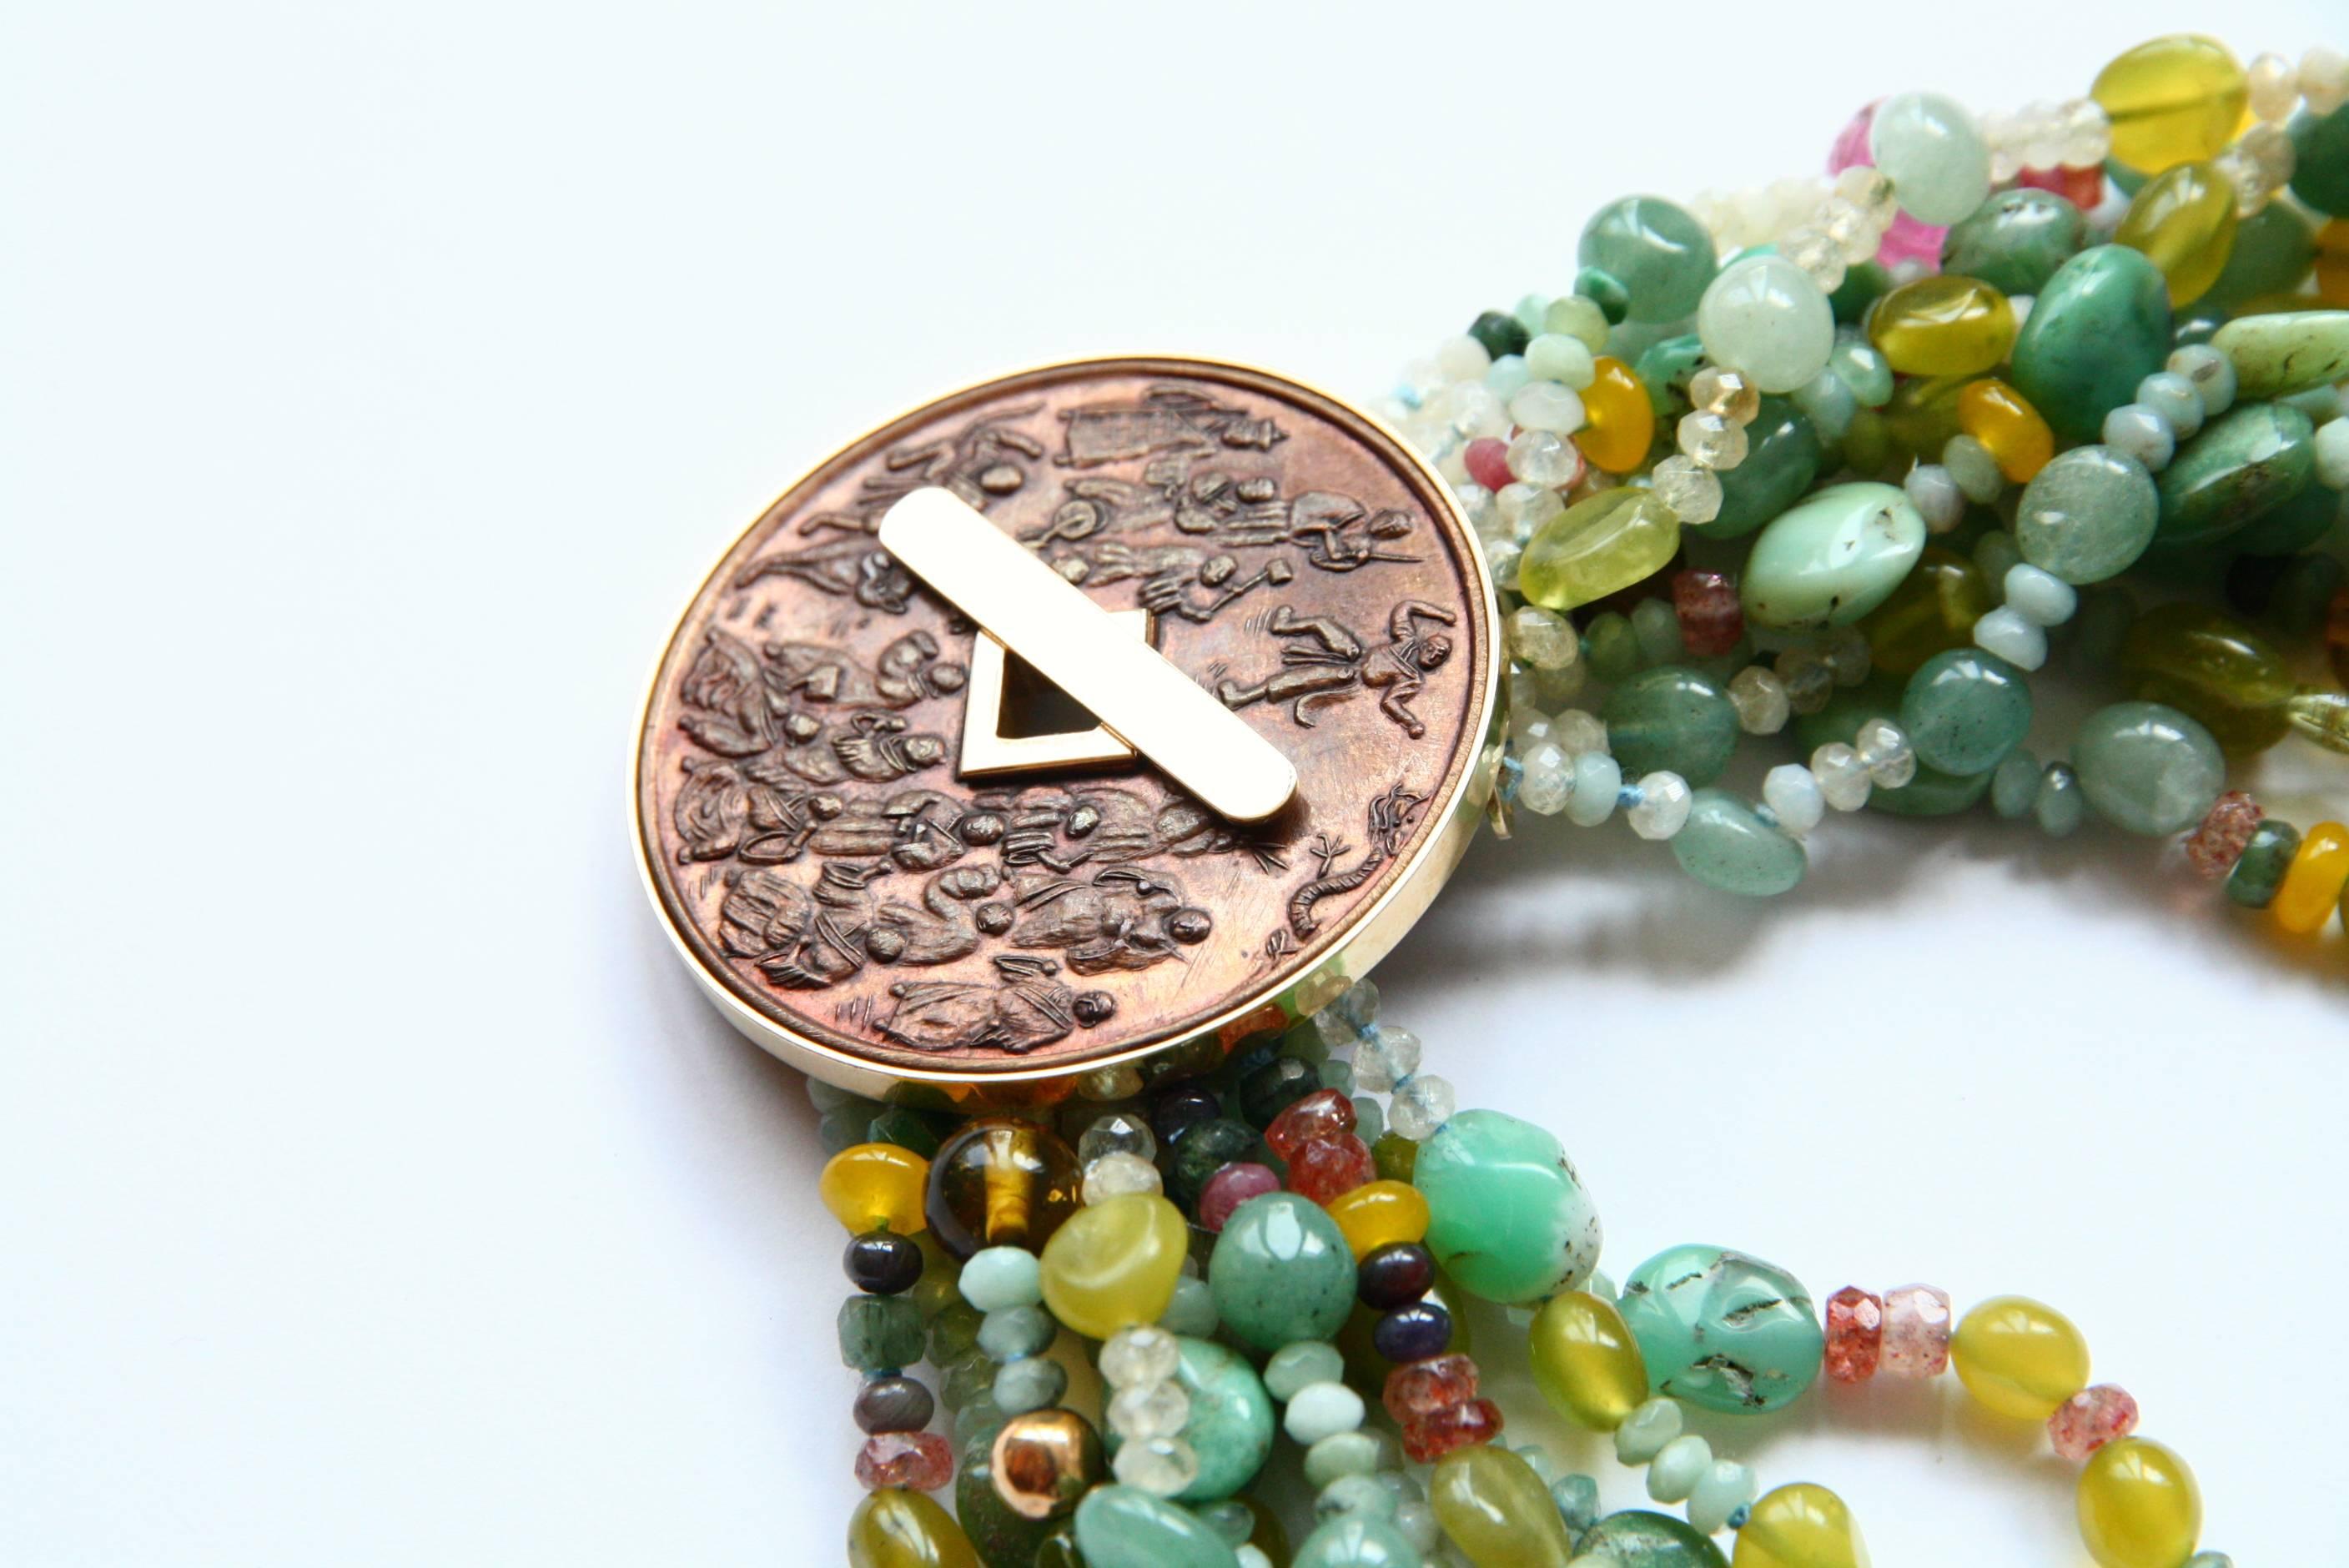 Amazing torch multi stone necklace tourmaline, jade, amazzonite, agata.... with antiques cinese bronze  coin linked in 18kt gold gr 14,90. Total length is 47 cm.
All Giulia Colussi jewelry is new and has never been previously owned or worn. Each